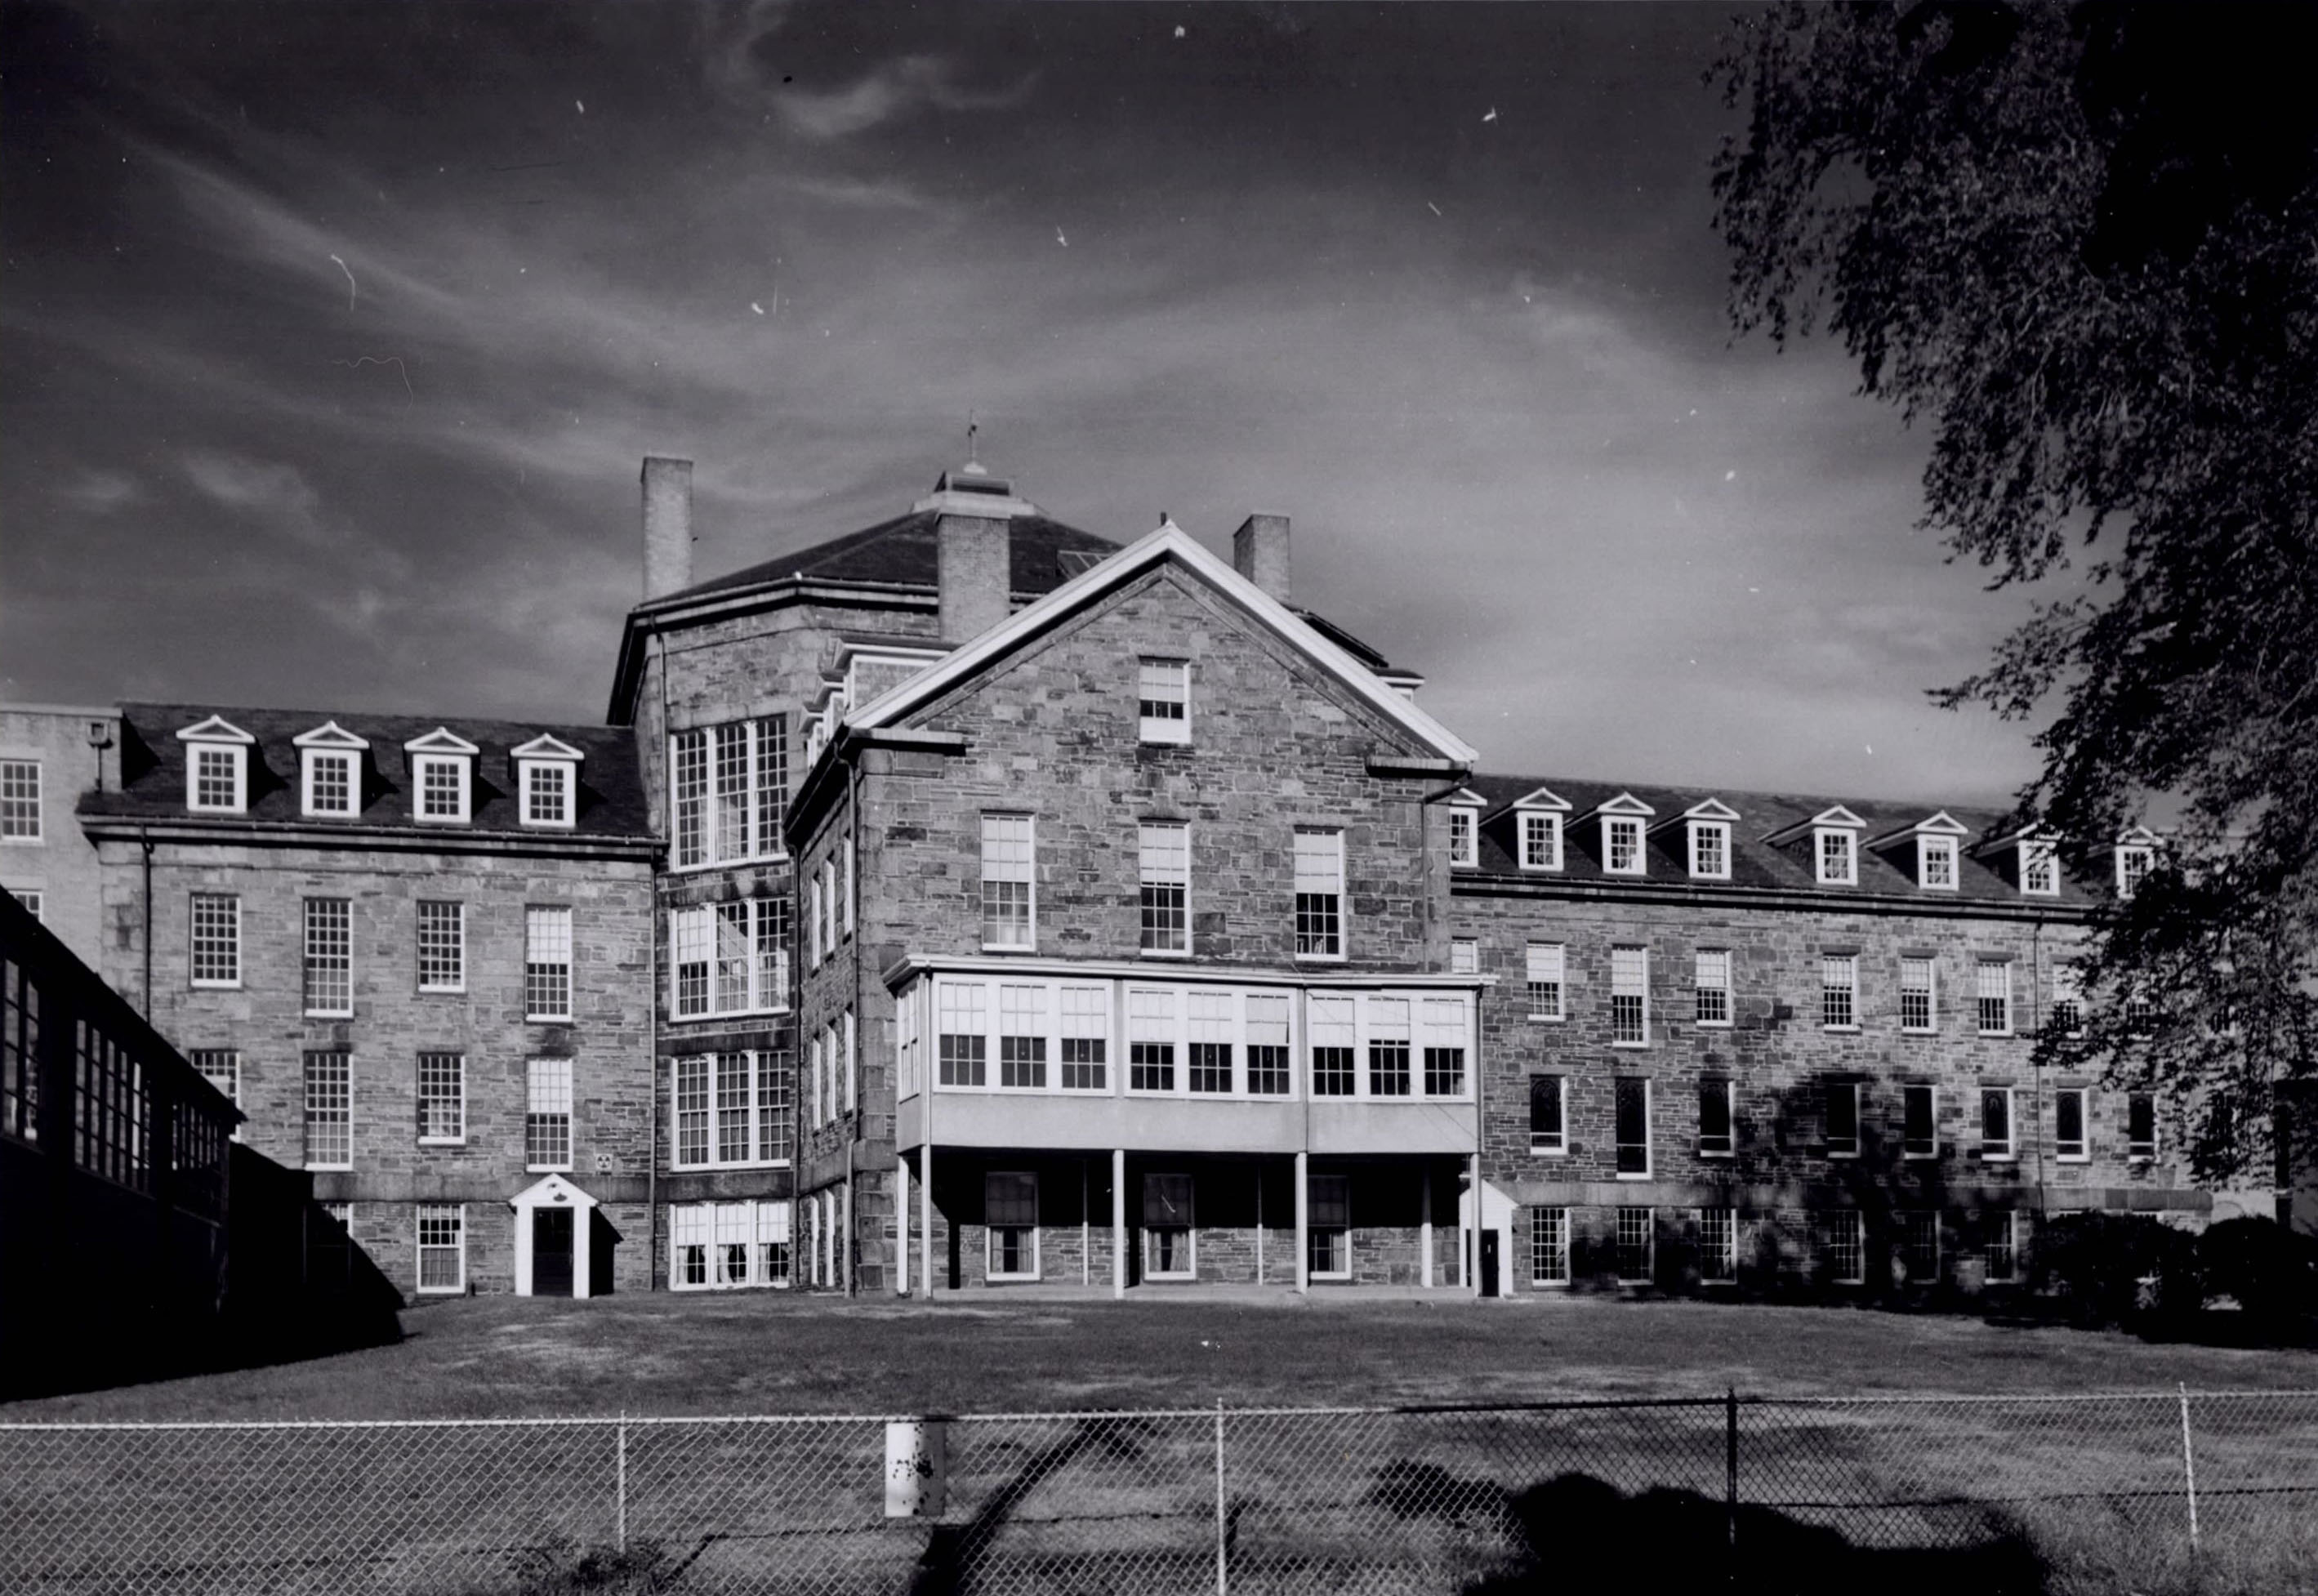 The Almshouse building (CA 1965) still stands at 45 Matignon Avenue and has been home to the International School of Boston since 2005.